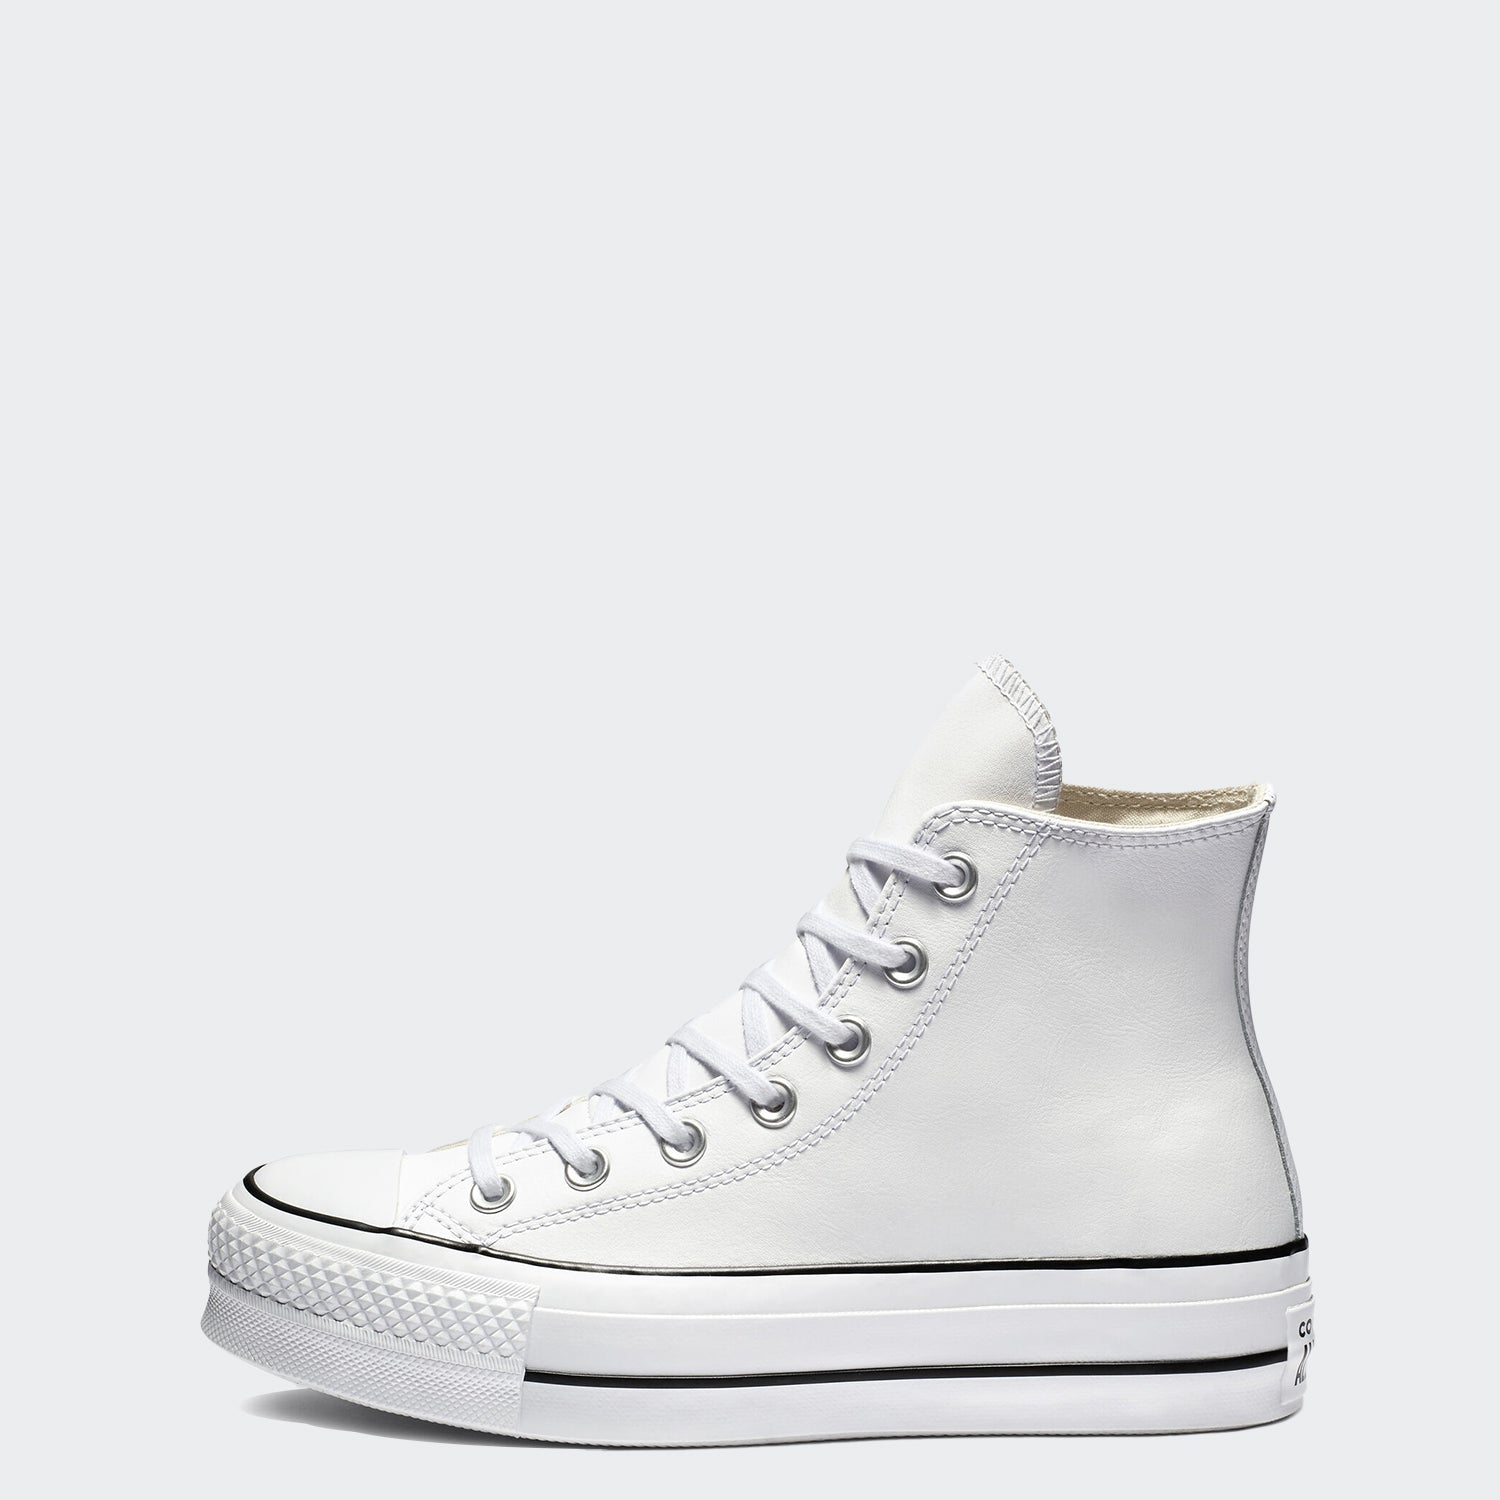 Converse Taylor Shoes | Chicago City Sports